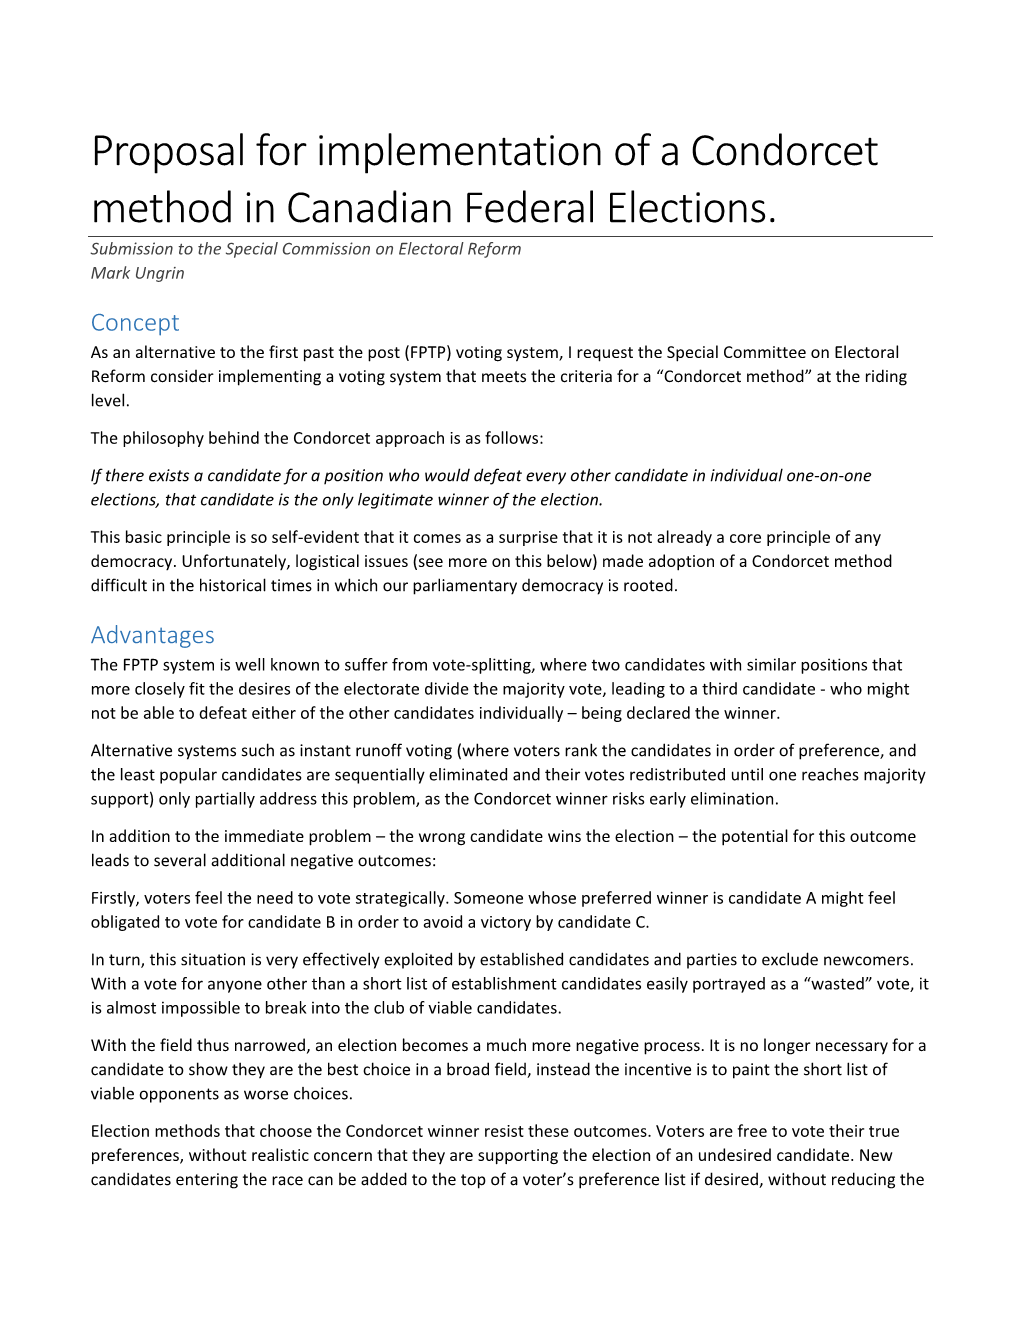 Proposal for Implementation of a Condorcet Method in Canadian Federal Elections